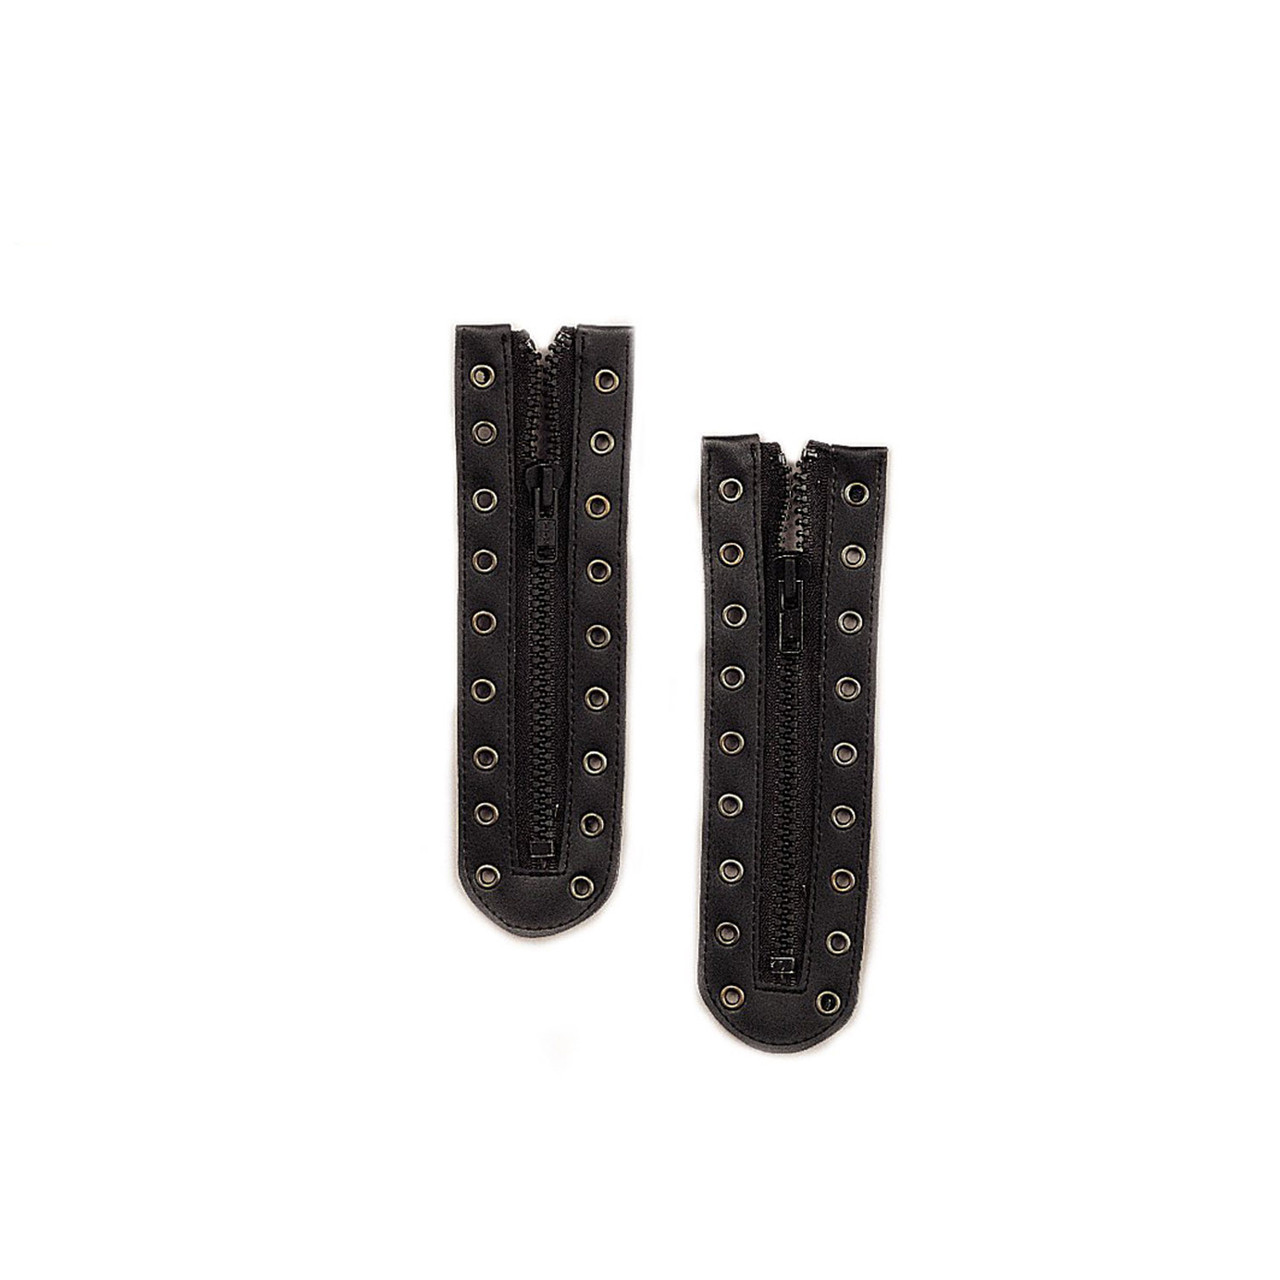 PH Leather Lace-In Boot Zipper Inserts, 6.1 x 2.1 inch 8 Metal Eyelets Zipper Boot Laces Black No Tie Shoe Laces for